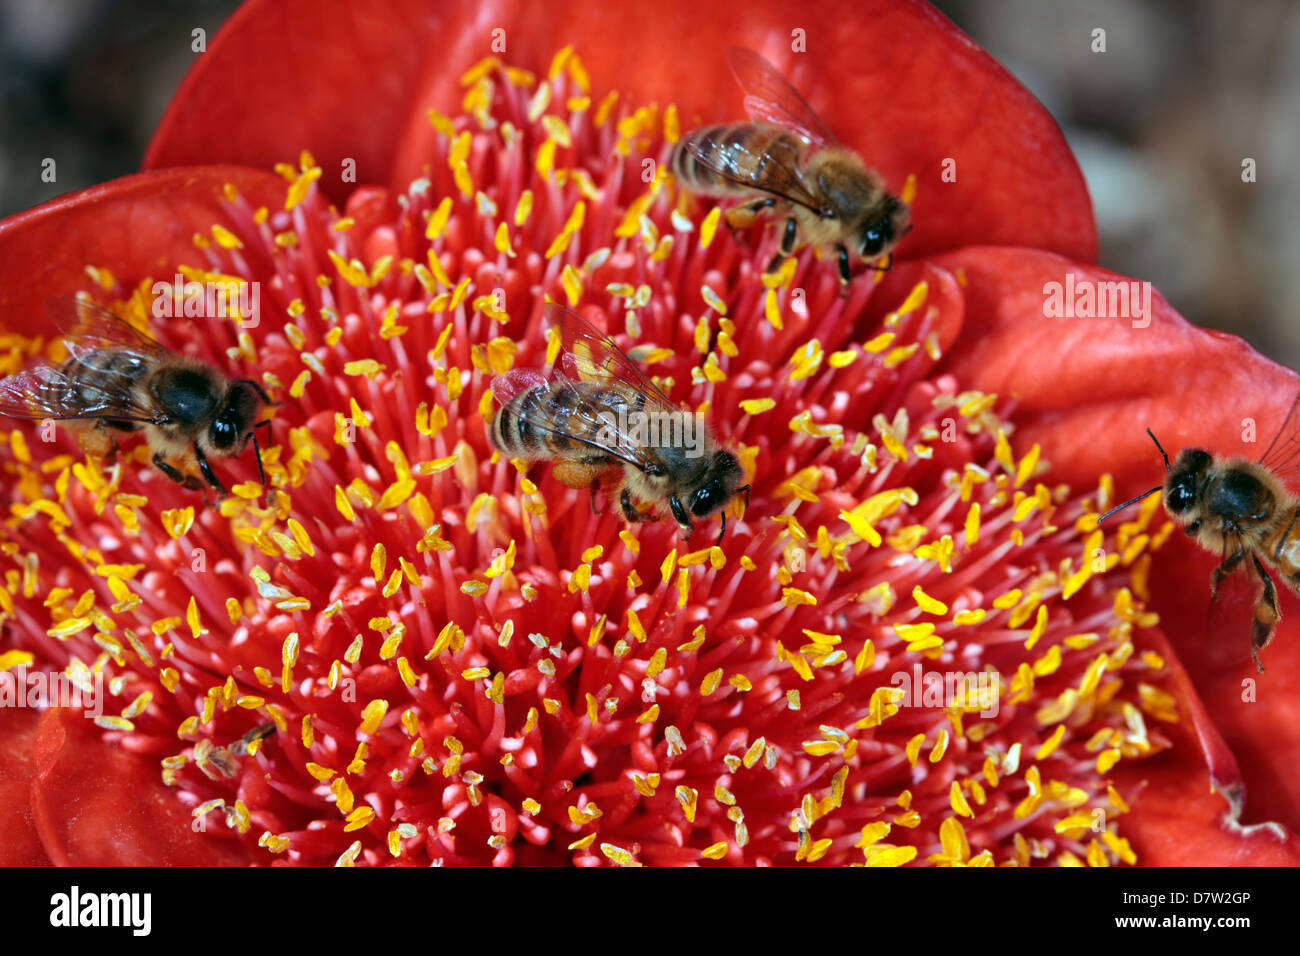 Honey Bees [Apis mellifera -Family Apidae]  collecting pollen from Haemanthus flower- [ Blood Lily - family Amaryllidoideae] Stock Photo